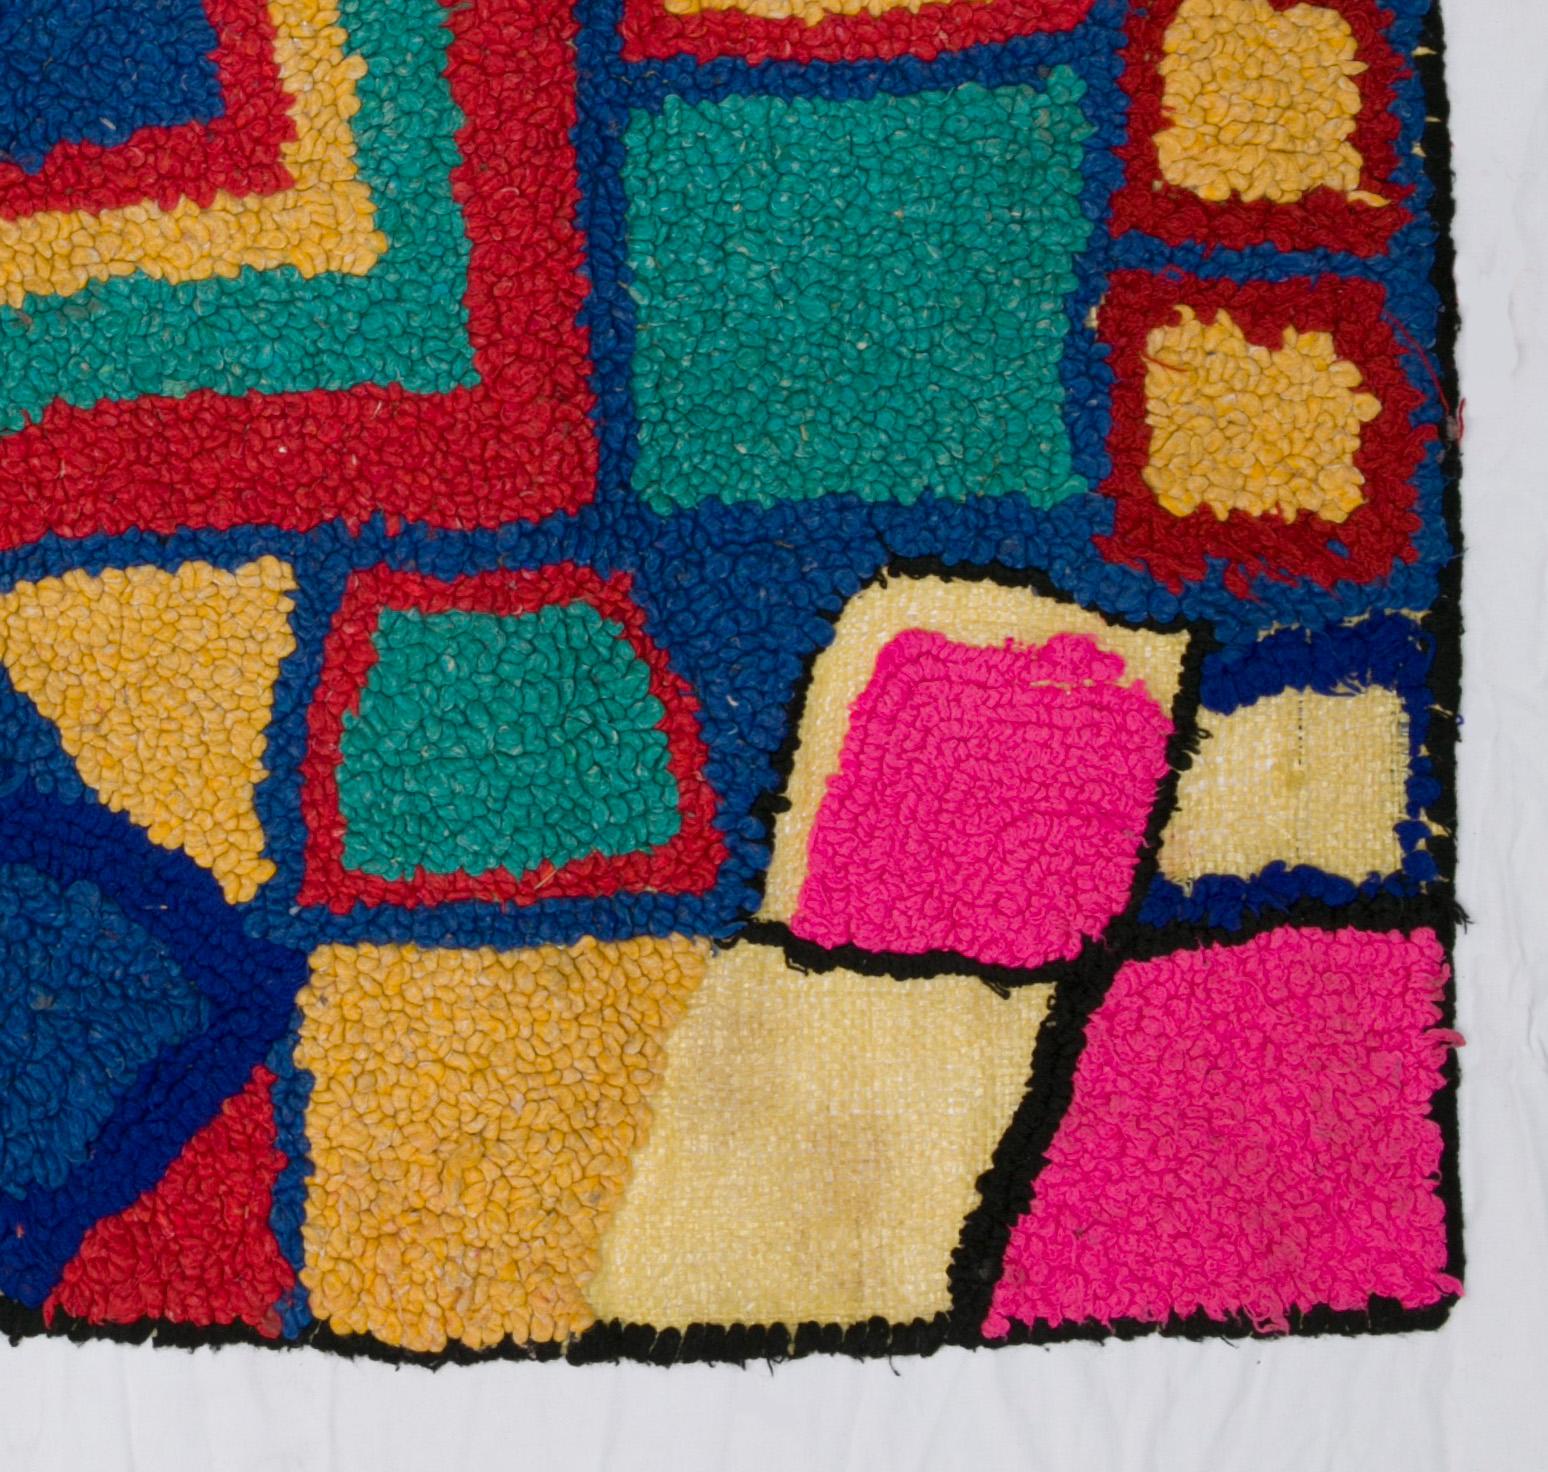 Geometric modern style but still vintage for this tapestry made by Berber women from the Atlas Mountains.
Made from woolen ends and other threads, embroidered on wasted plastic bags of cereals, this unique and vintage work is the demonstration of